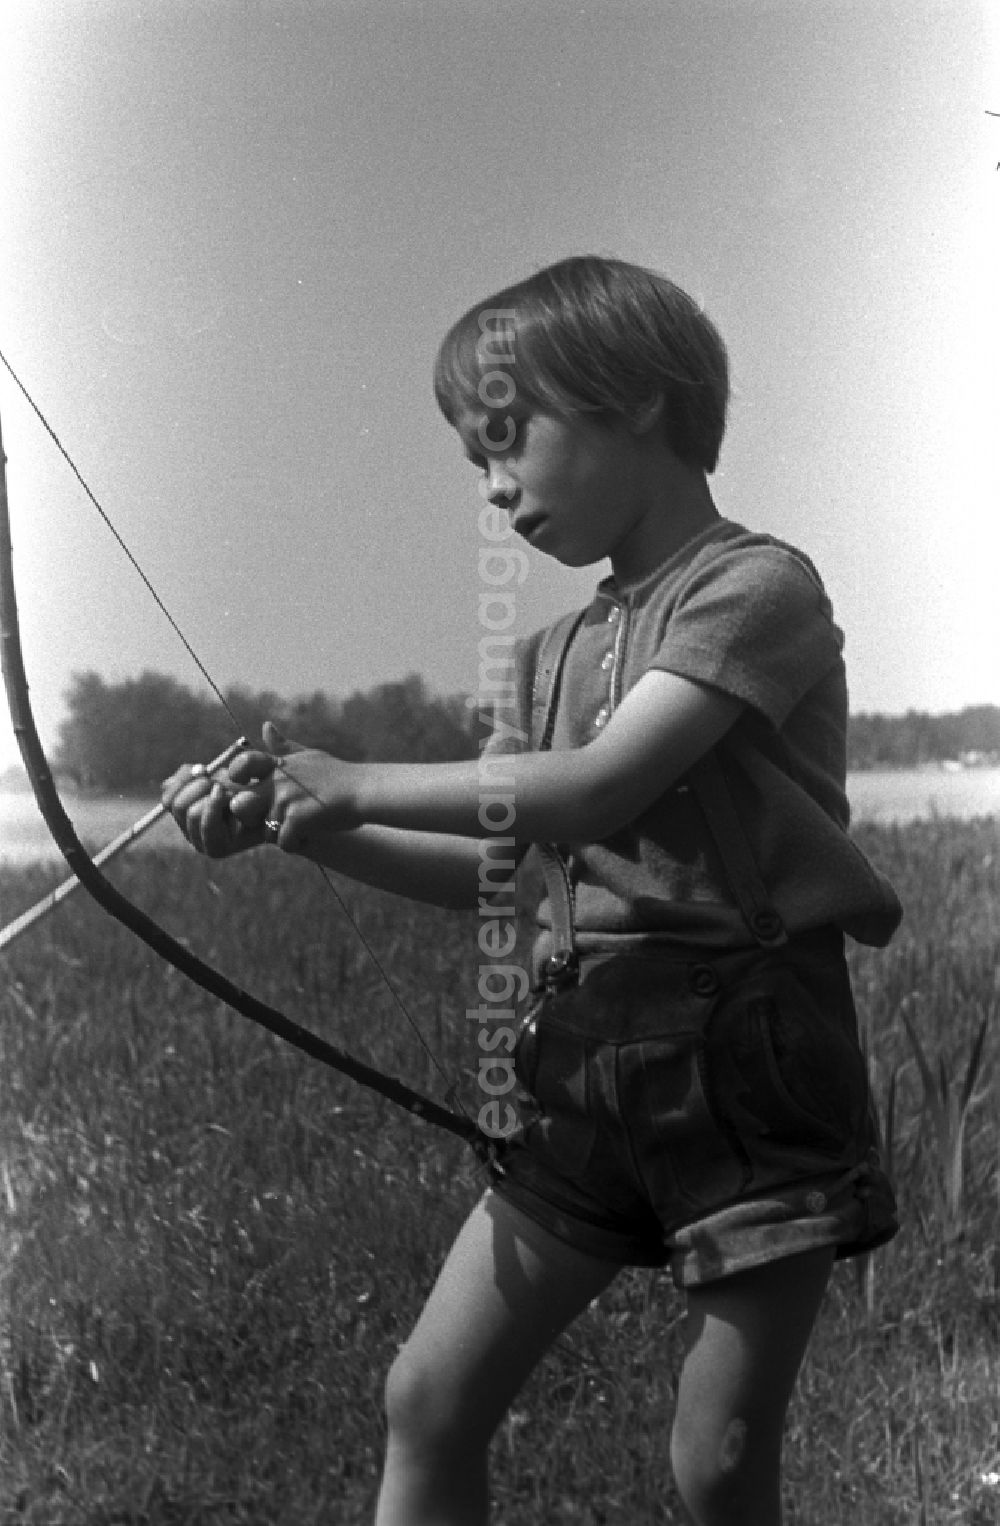 GDR photo archive: Kirchmöser - A small child in leather pants playing with bow and arrow on a meadow in Brandenburg